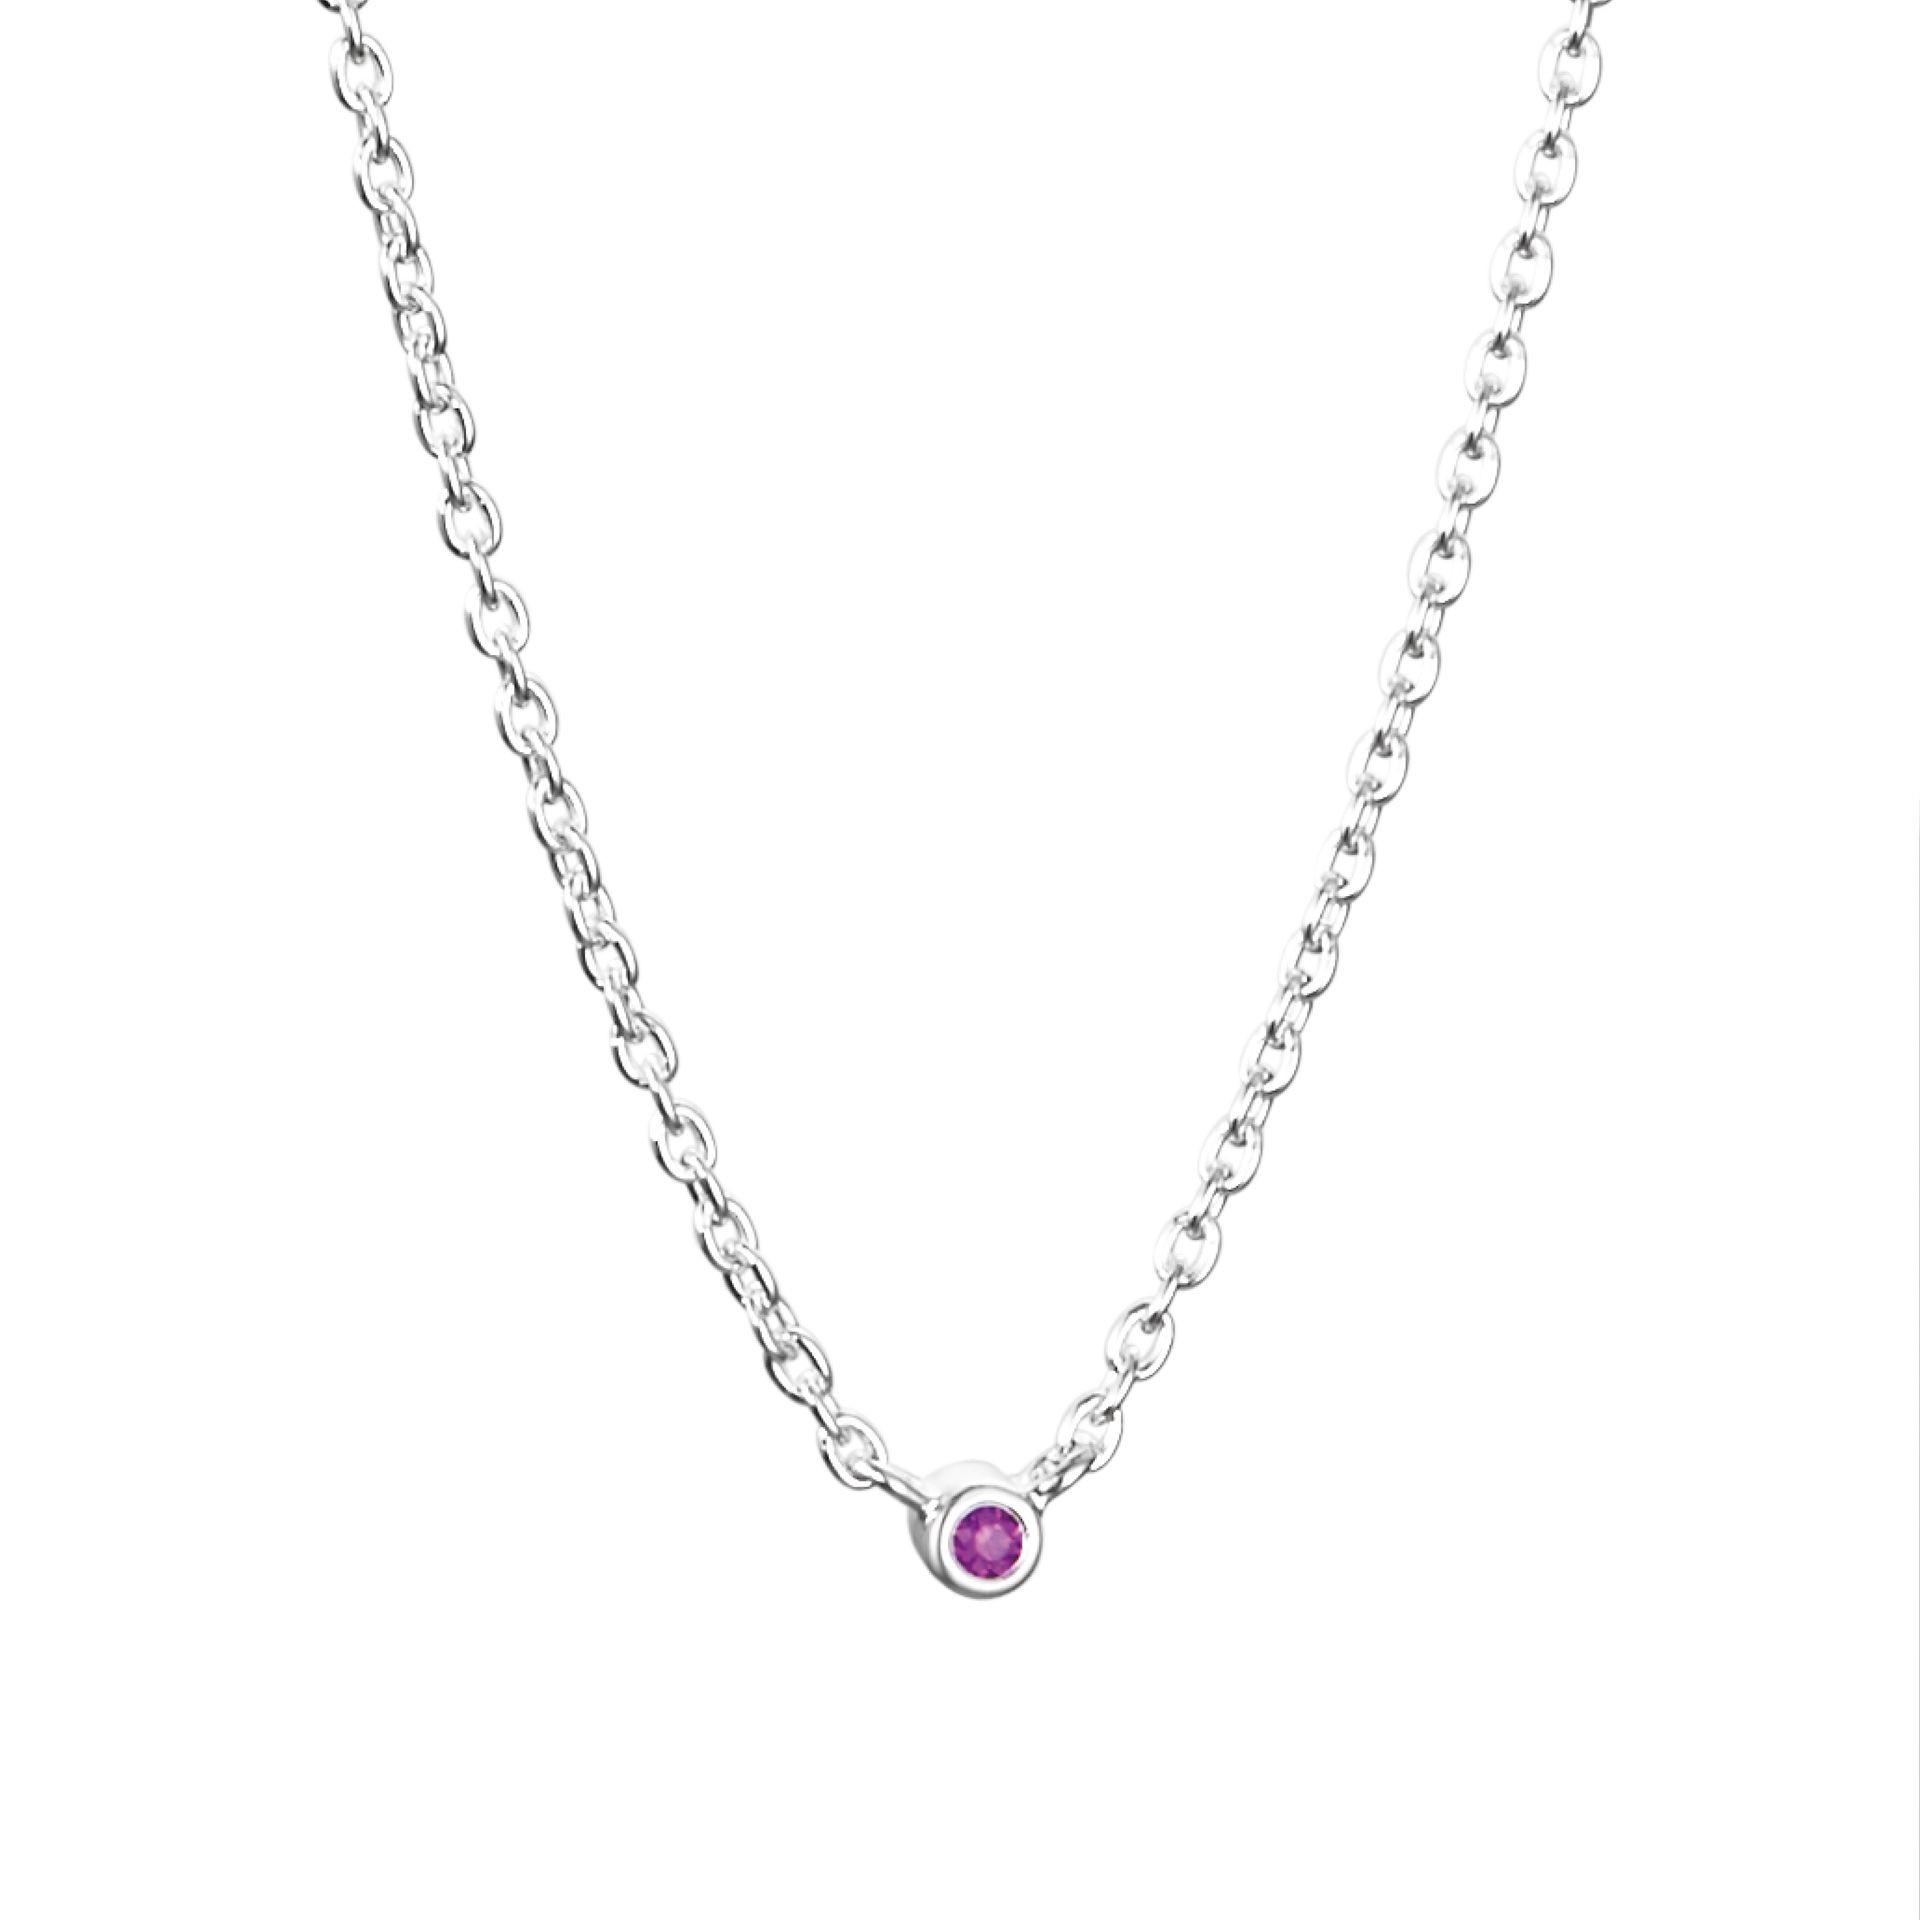 Micro Blink Necklace - Pink Sapphire